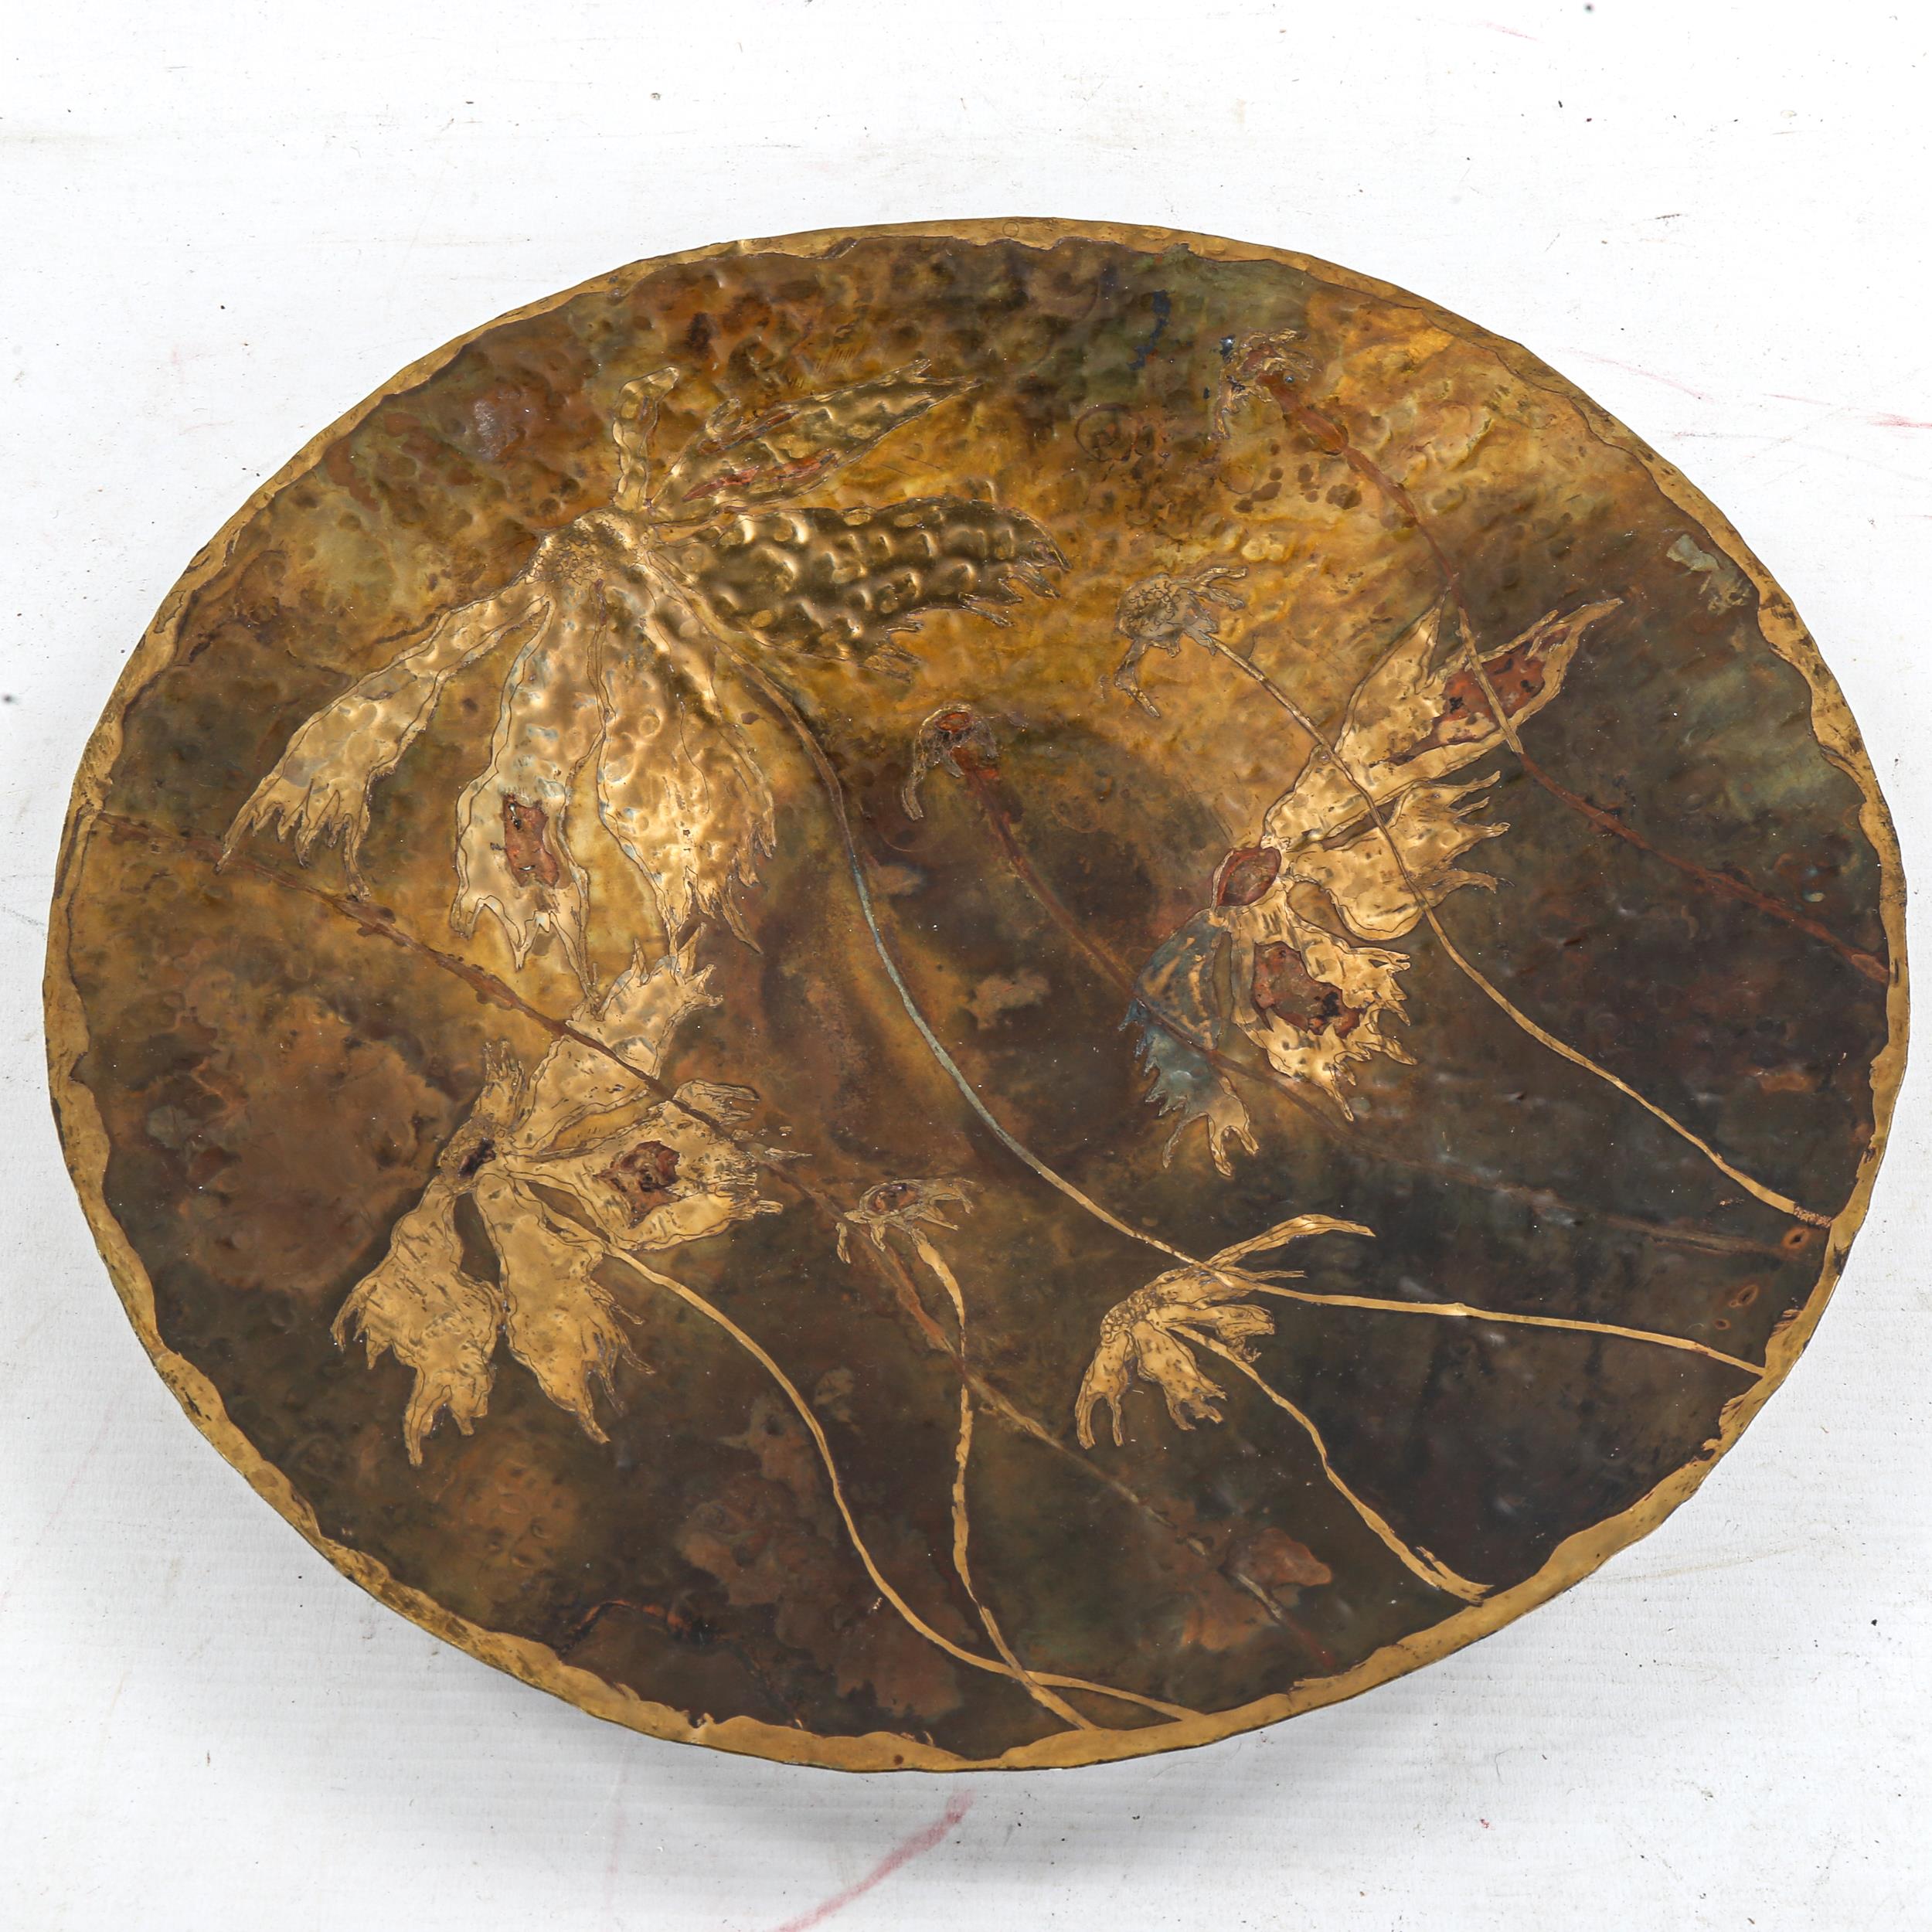 An Arts and Crafts hammered copper bowl, with brass inlaid decoration, indistinctly signed Valerie